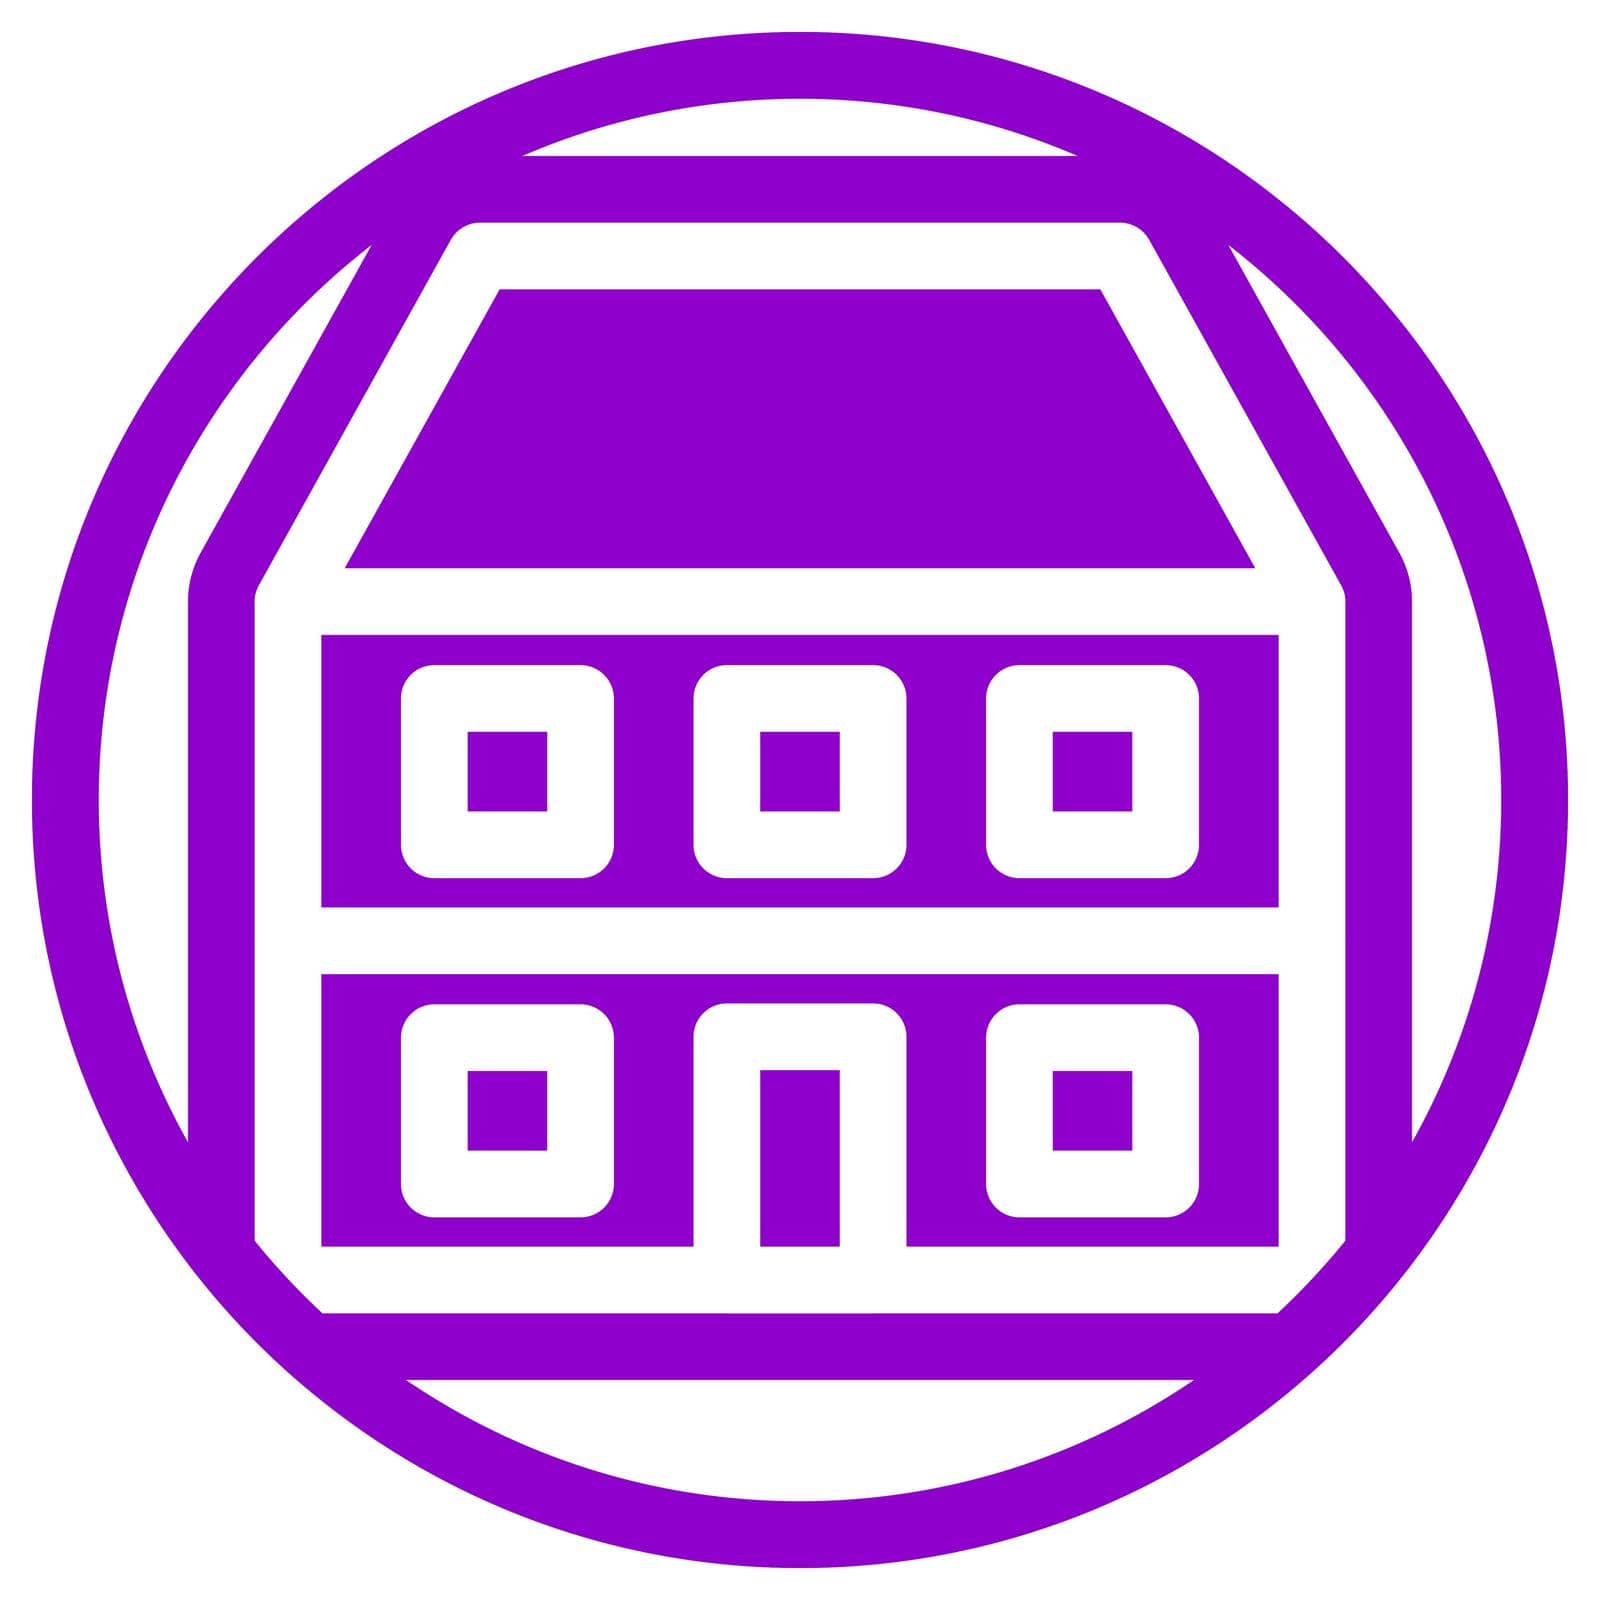 Apartment icon in flat design with purple color and outline on a line circle background.